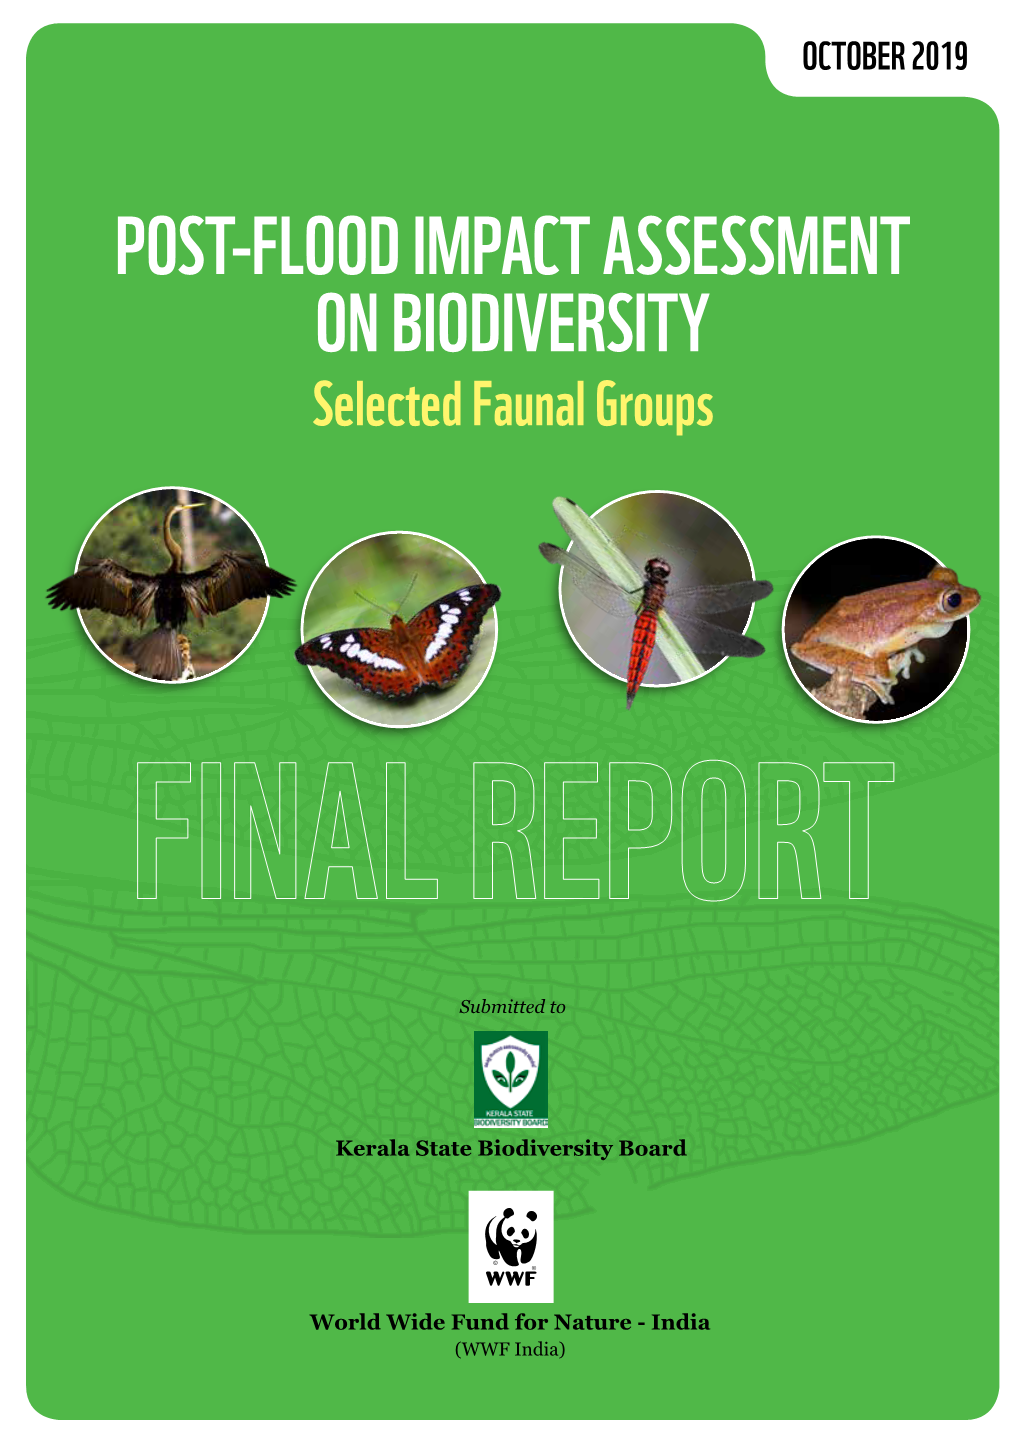 POST-FLOOD IMPACT ASSESSMENT on BIODIVERSITY Selected Faunal Groups